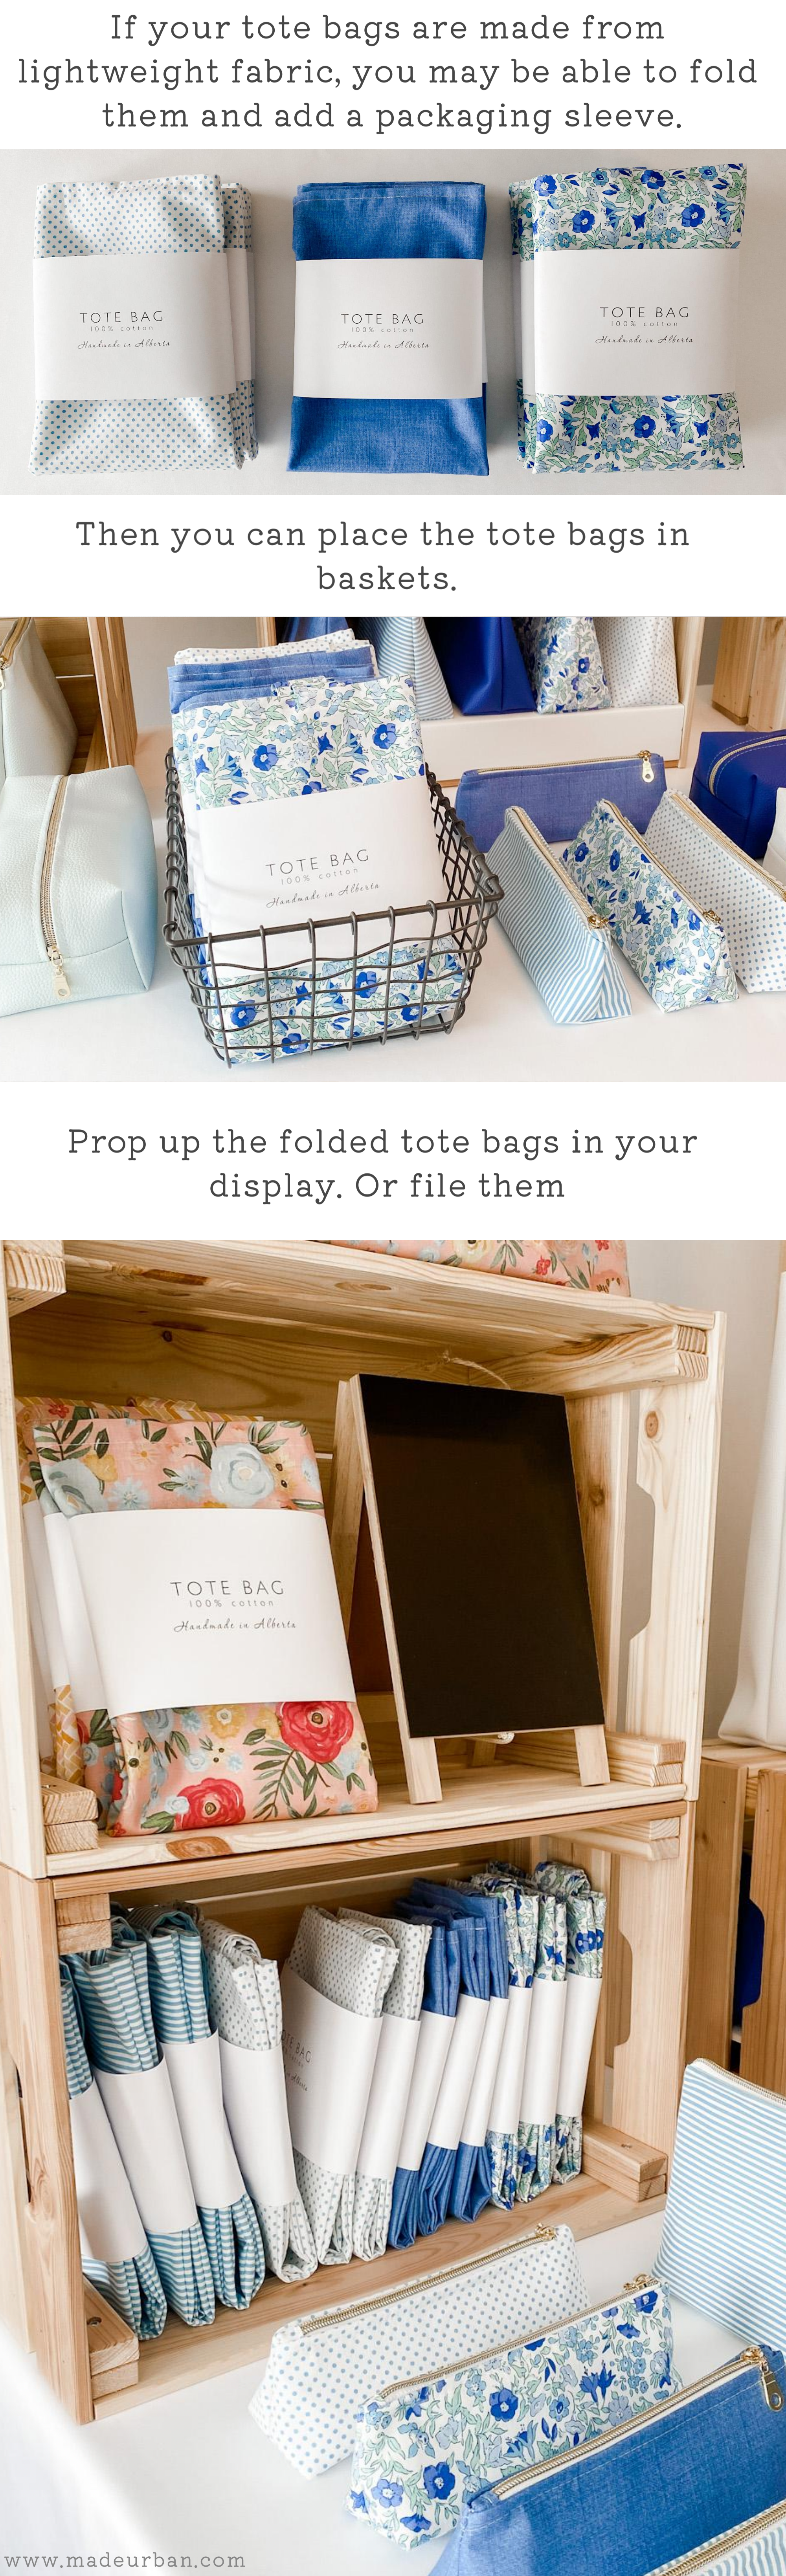 Folded tote bags